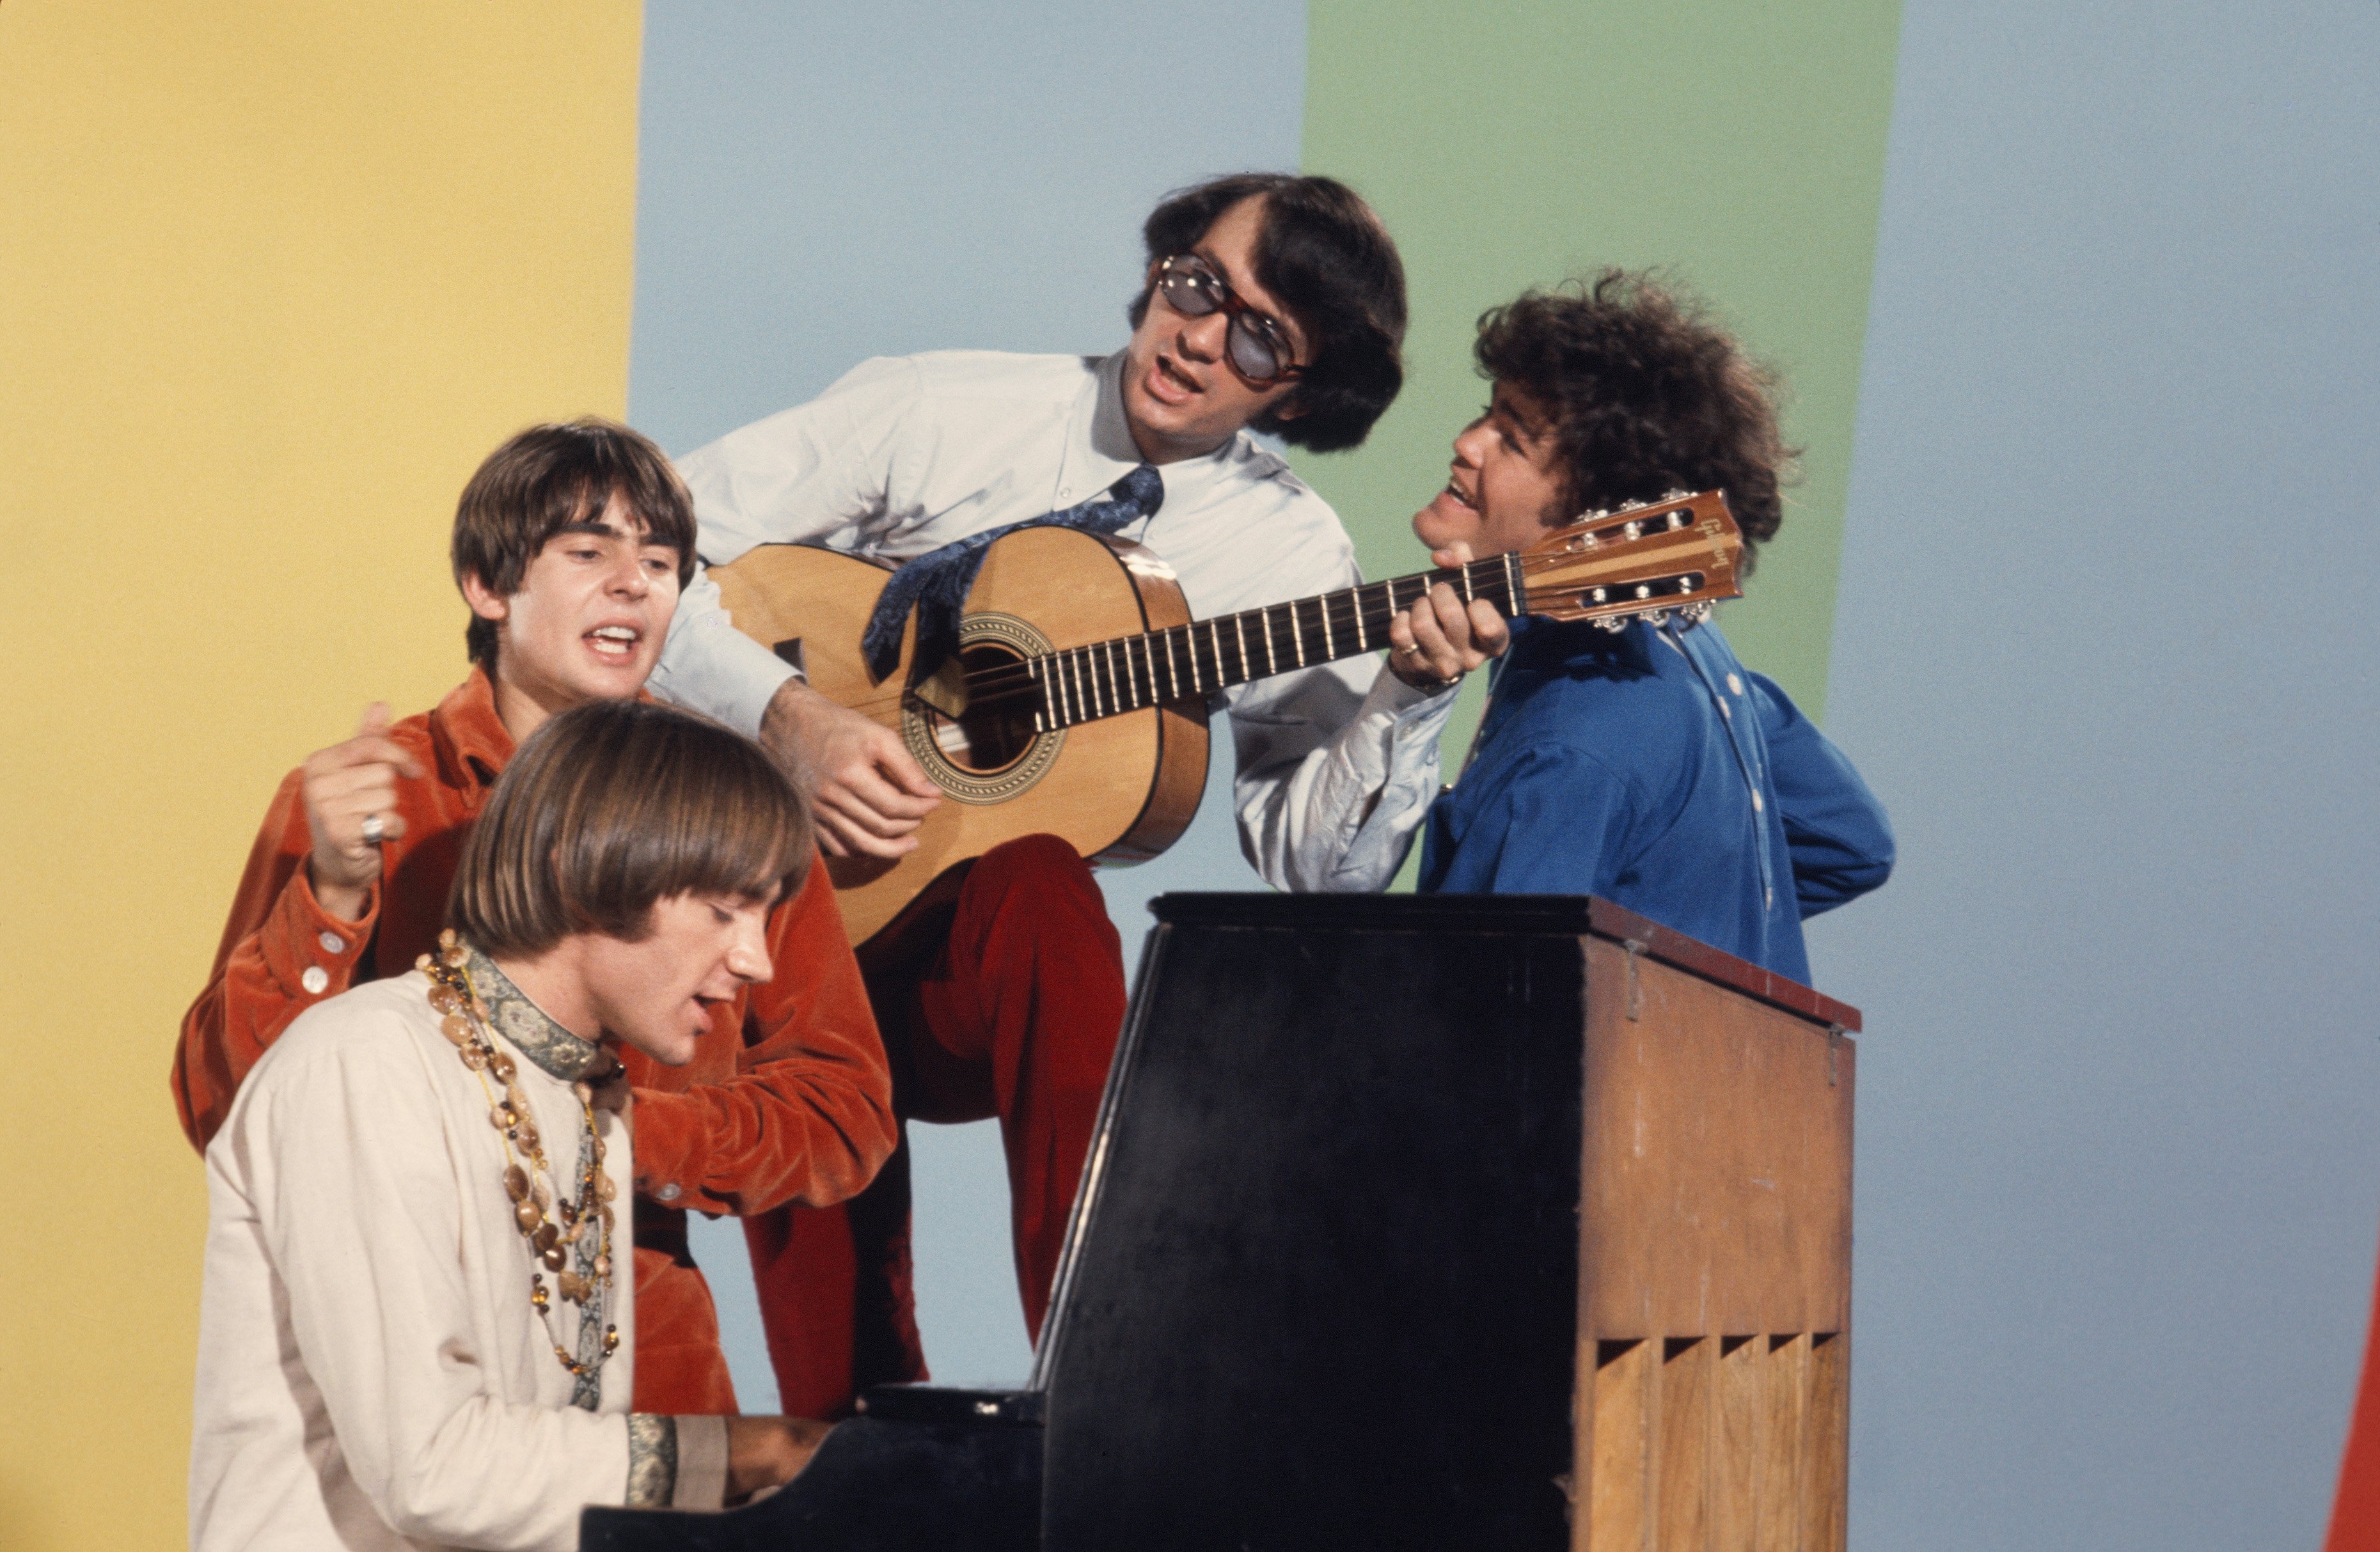 The Monkees’ Davy Jones, Peter Tork, Mike Nesmith, and Micky Dolenz at a piano